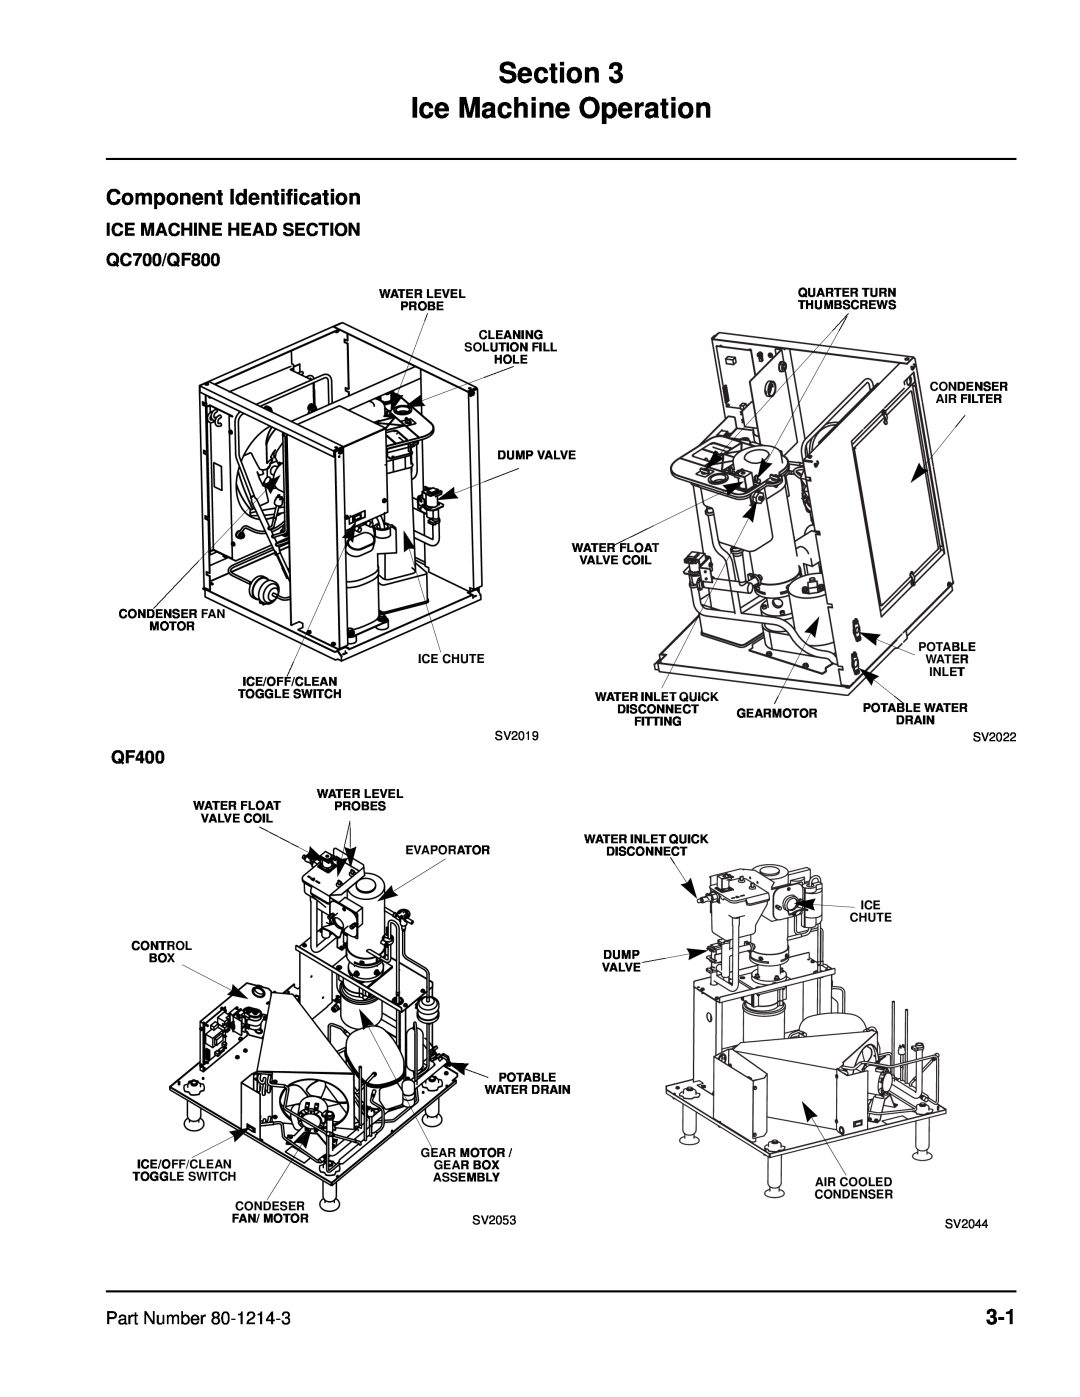 Manitowoc Ice QF0800 Section Ice Machine Operation, Component Identification, ICE MACHINE HEAD SECTION QC700/QF800, QF400 